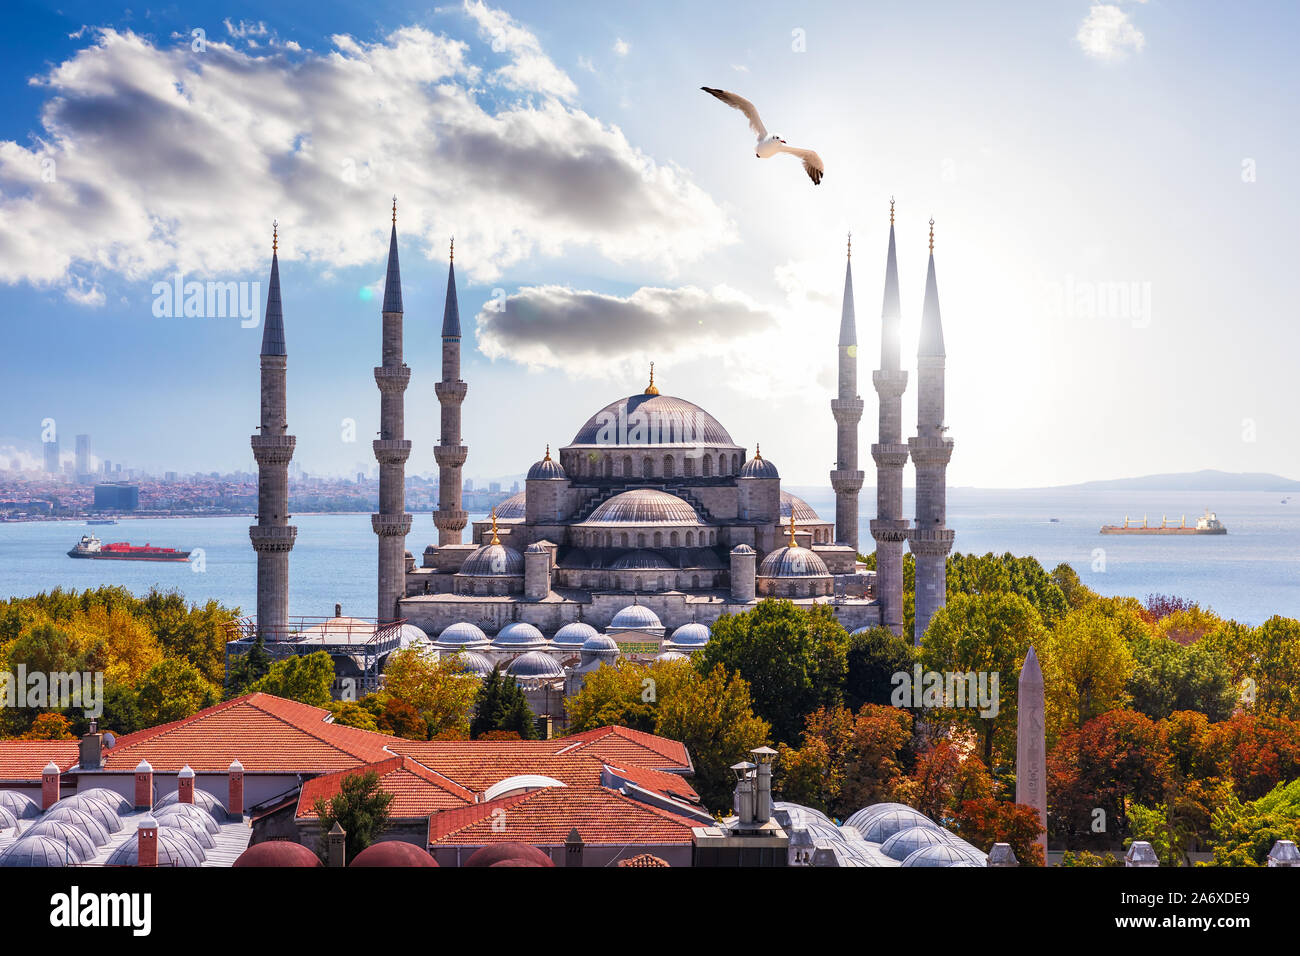 Gorgeous Sultan Ahmet Mosque in Istanbul and the Bosporus on the background Stock Photo